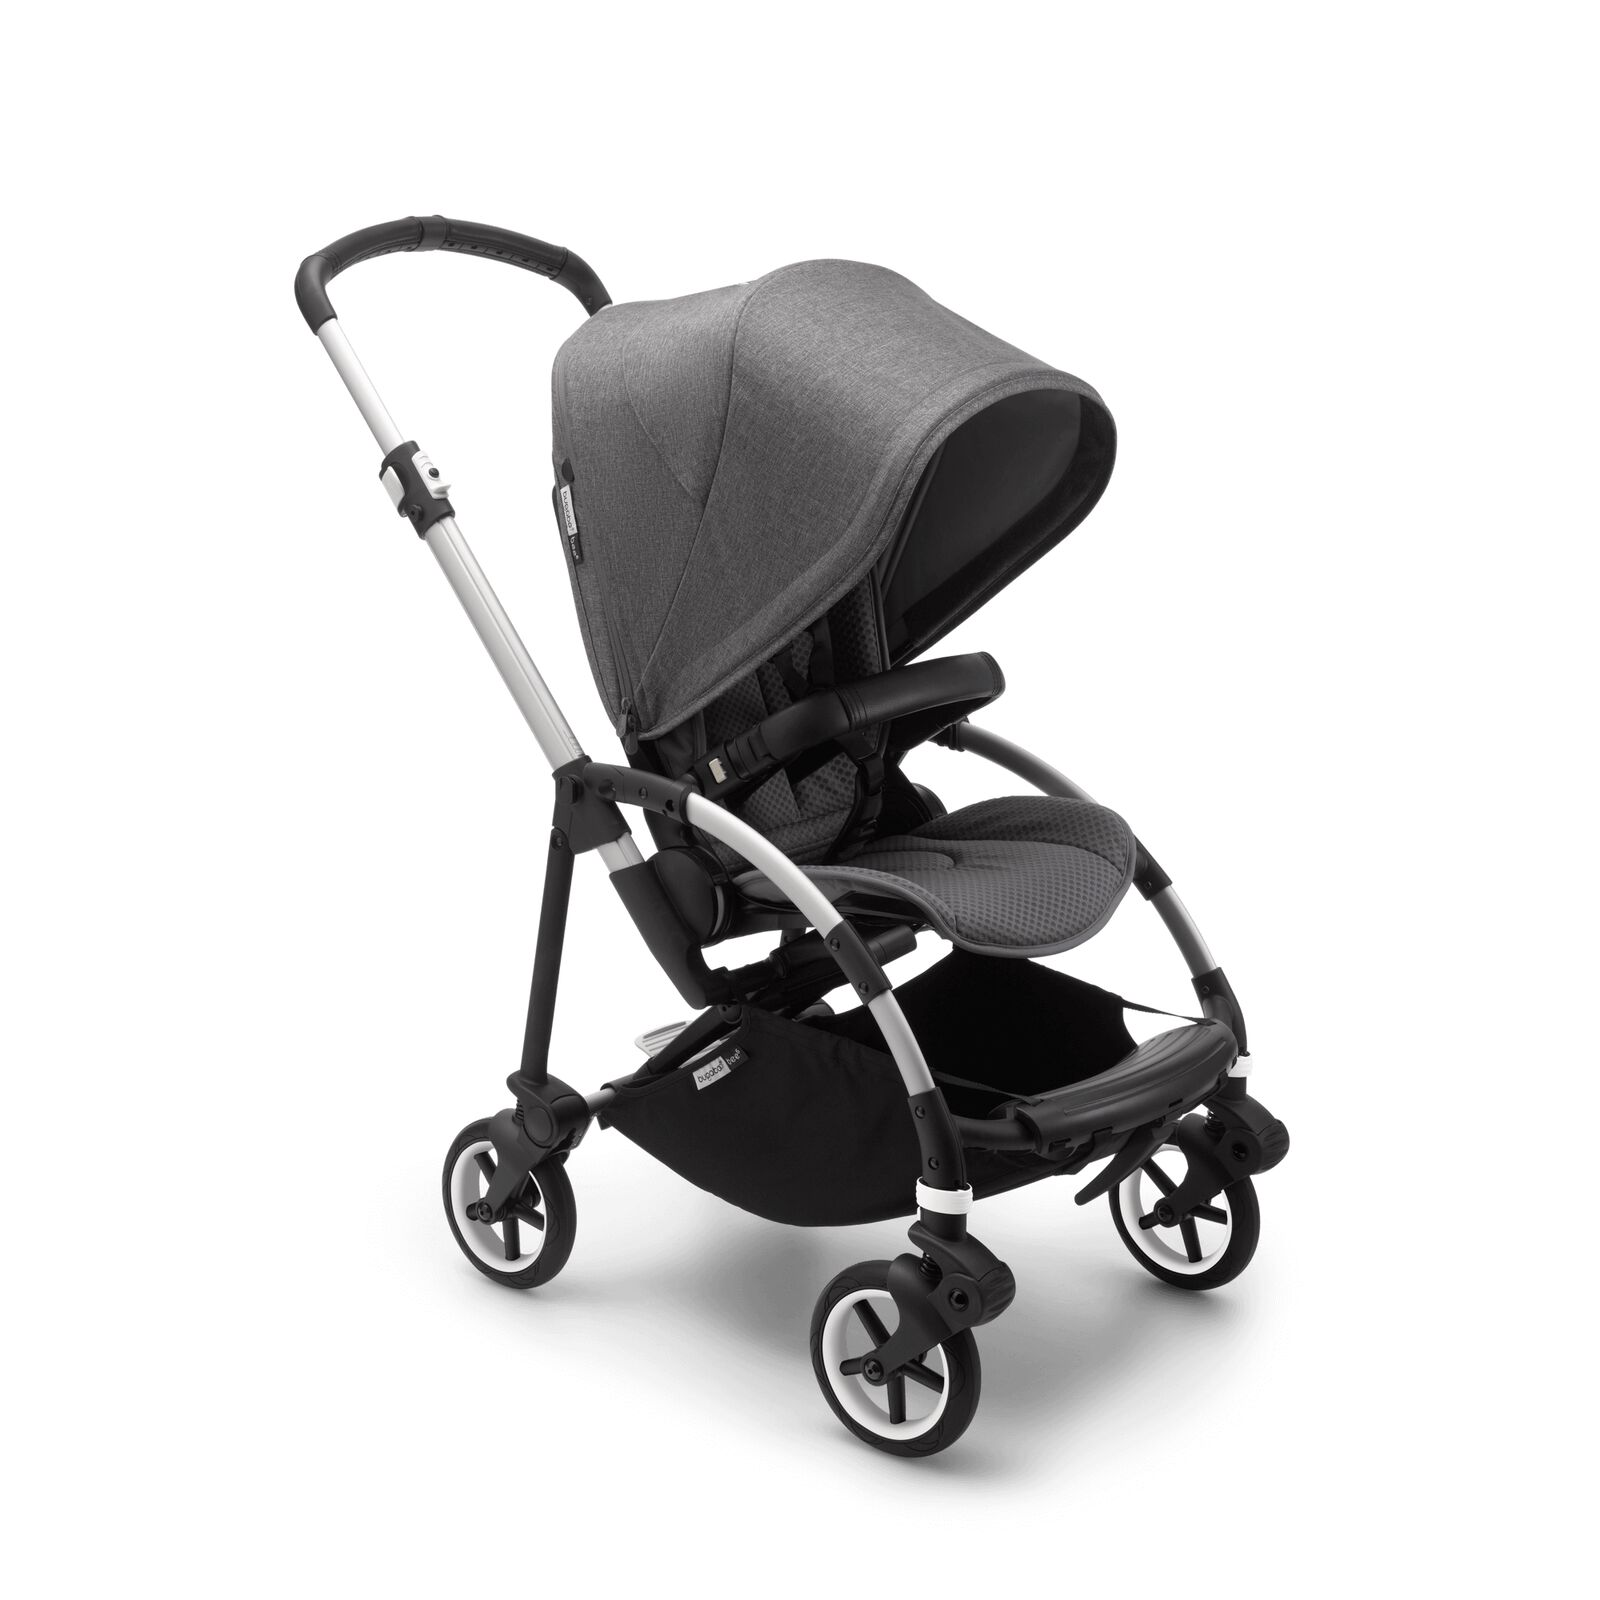 Bugaboo Bee 6 seat and bassinet stroller - View 3